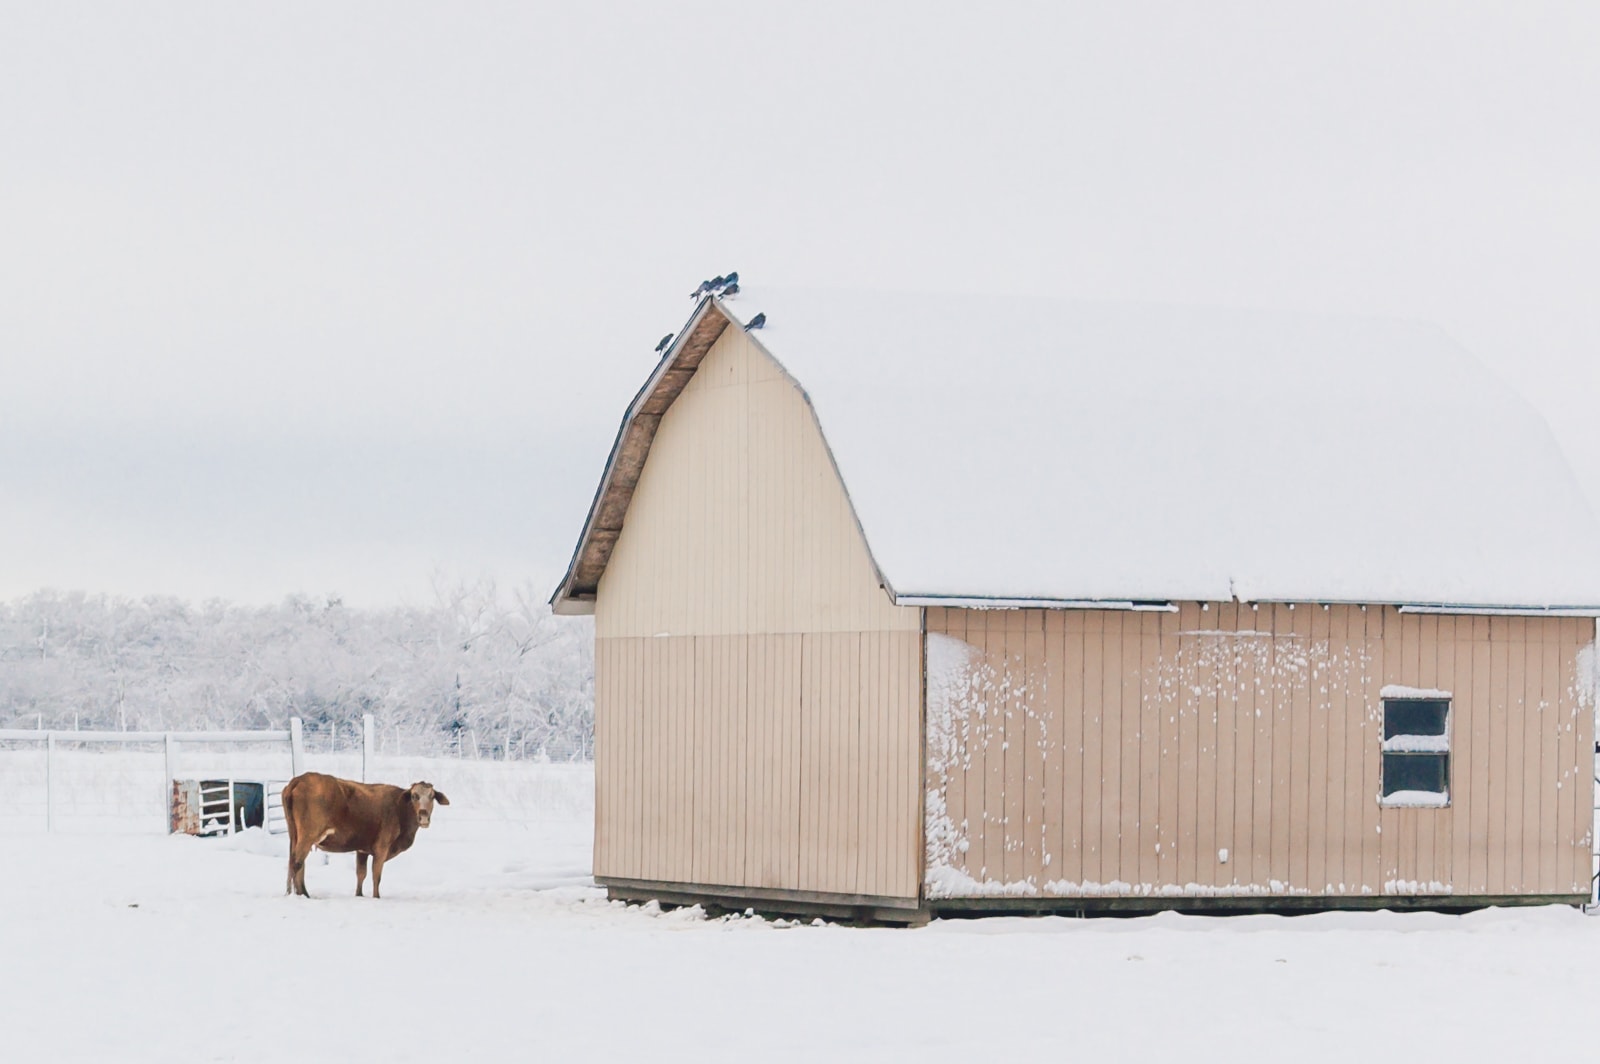 A cow and small barn in Snowmageddon 2010